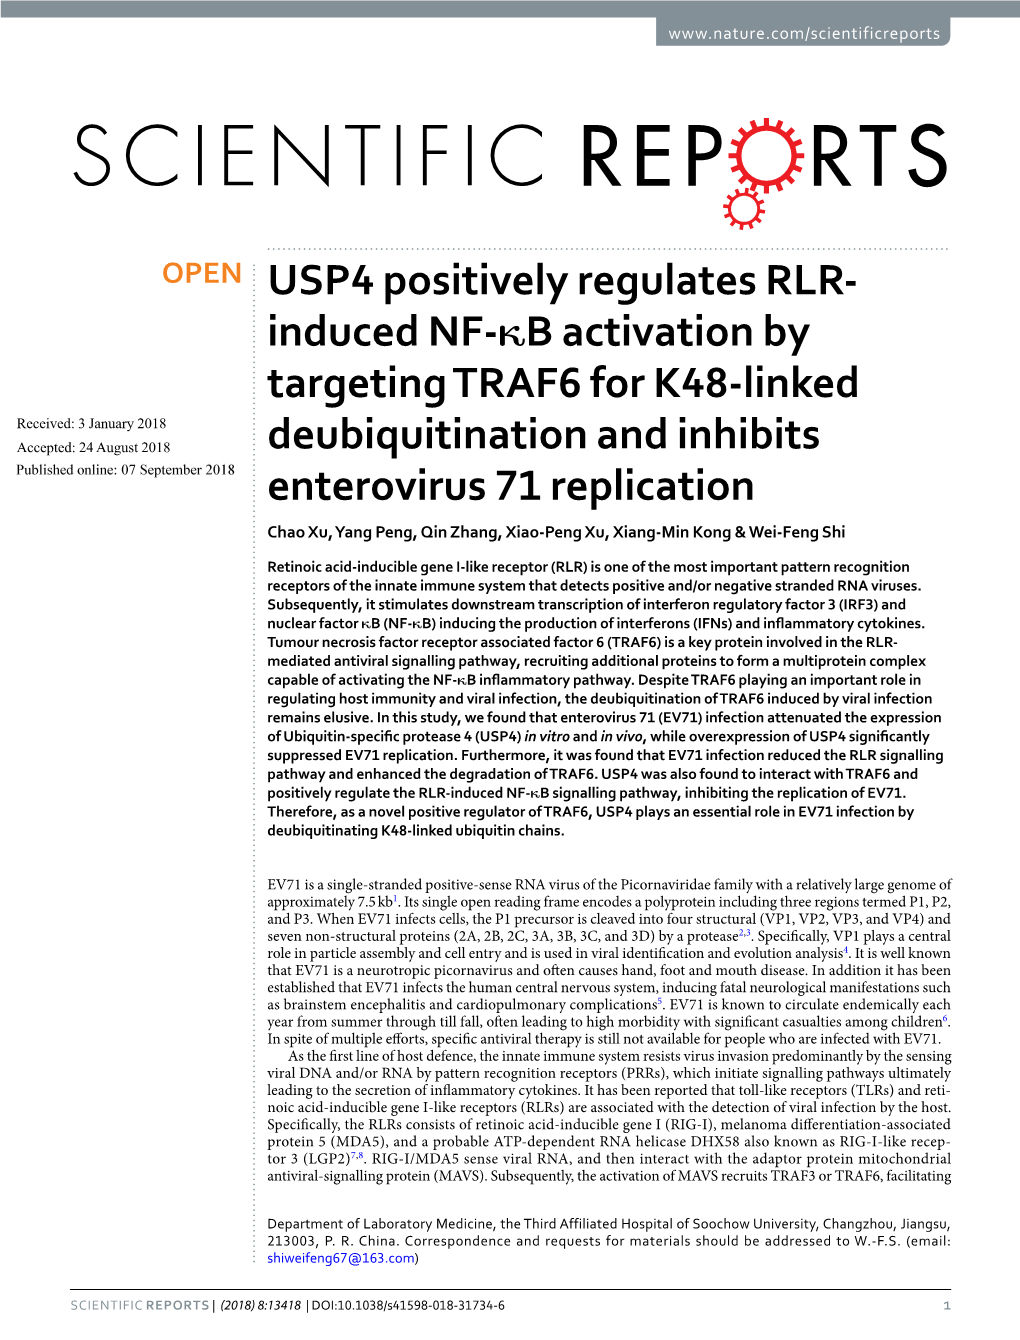 USP4 Positively Regulates RLR-Induced NF-Κb Activation By